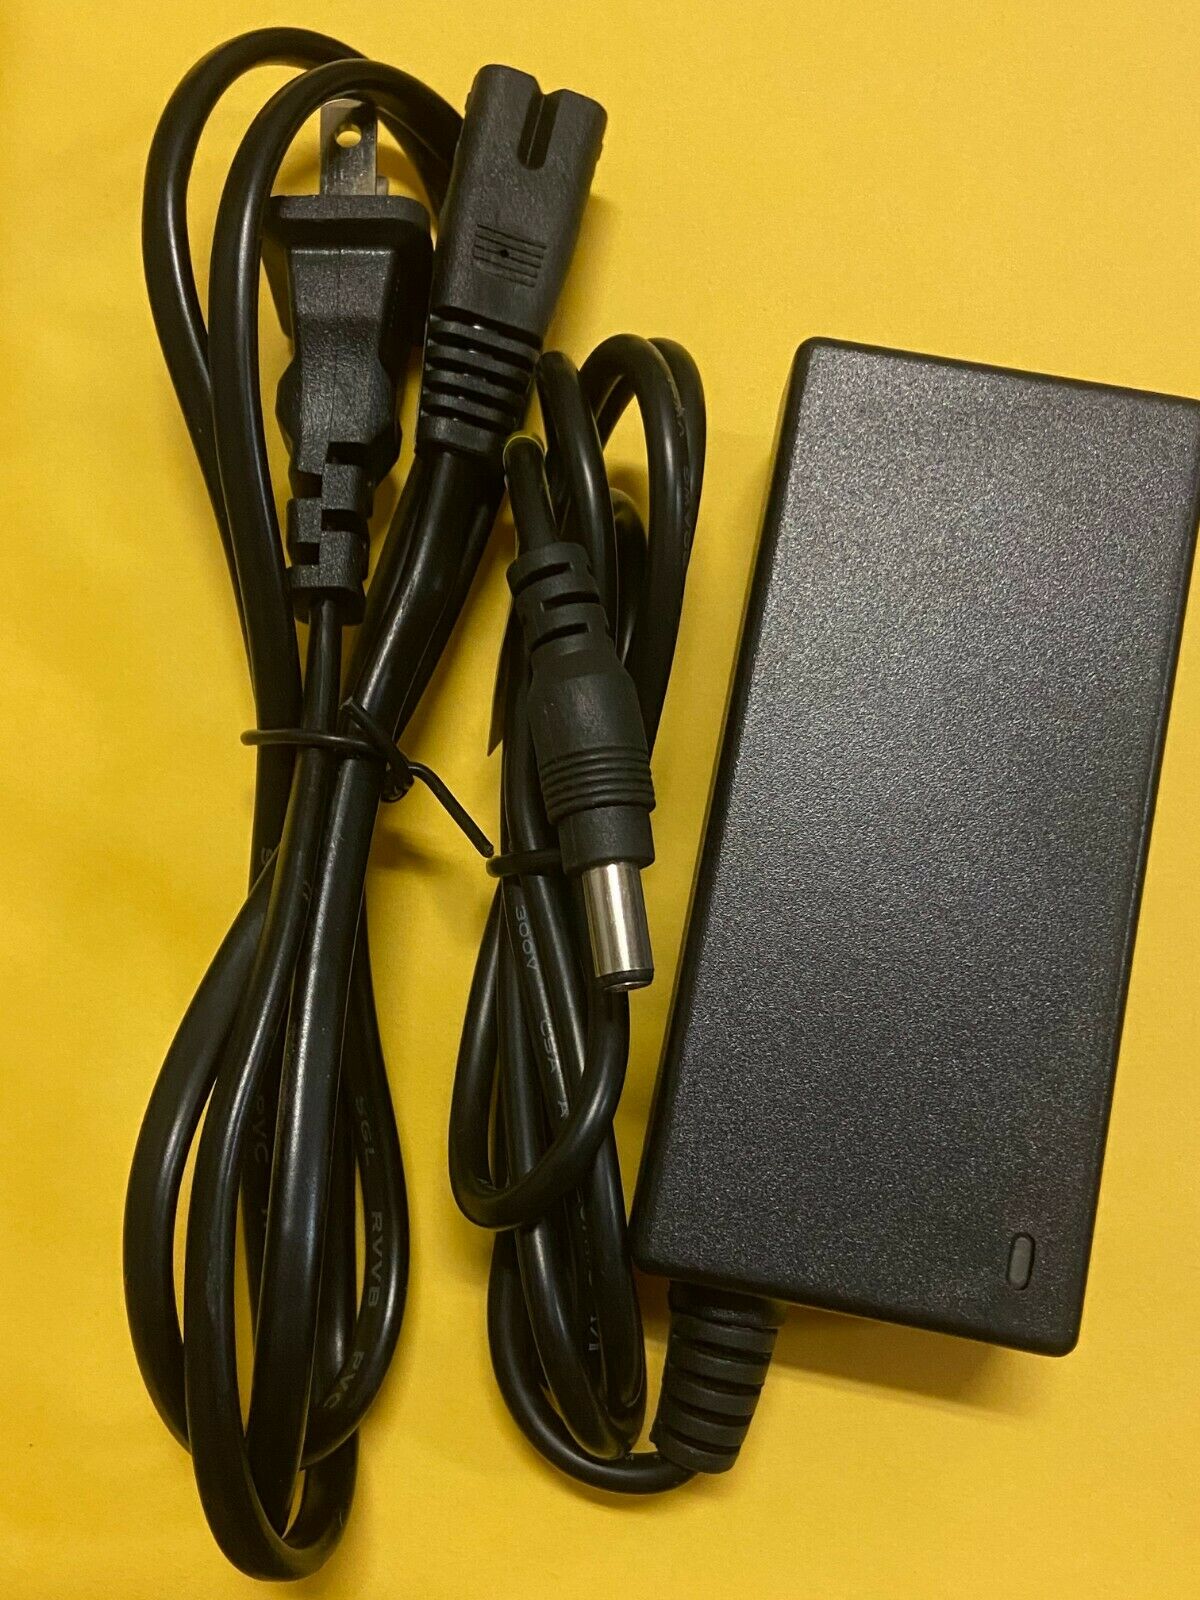 19V AC DC Adapter Power Charger for BA-301 Inogen One G2 G3 Concentrator New Input Voltage 100-240